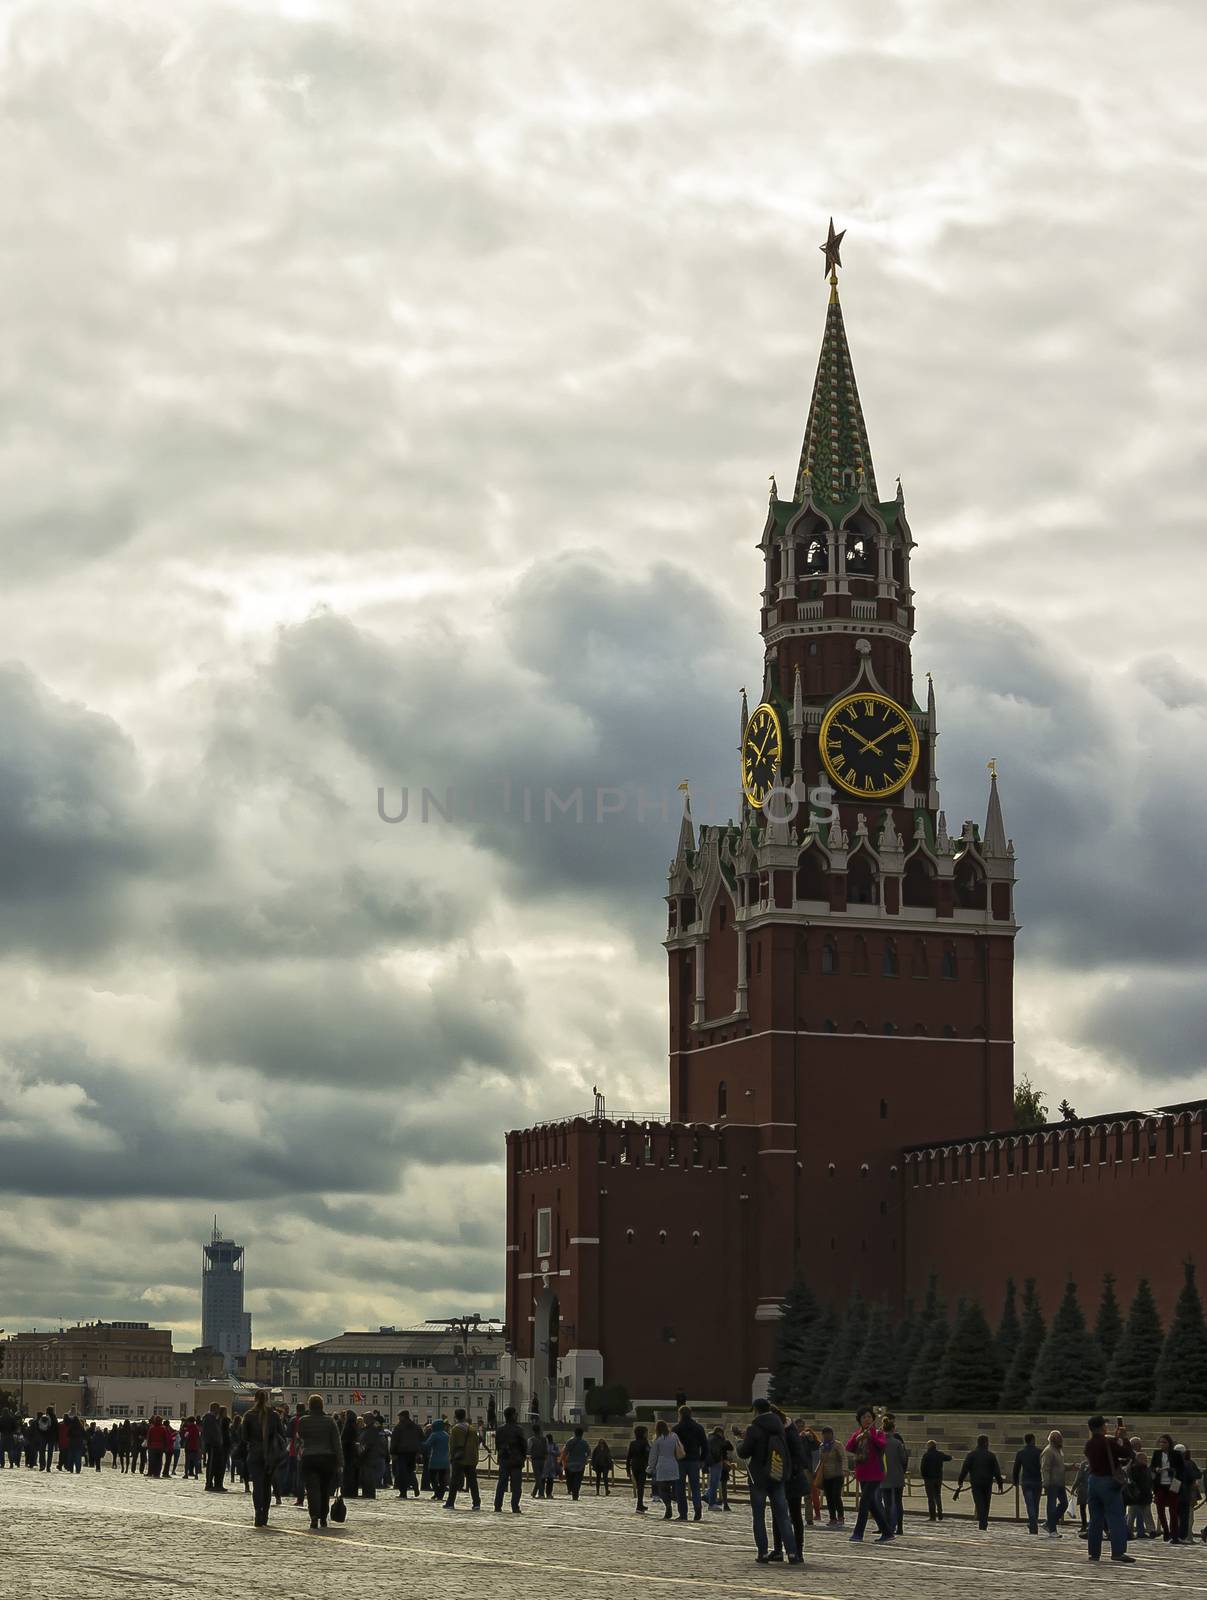 Spasskaya tower in red square (Moscow, Russia) by Grommik